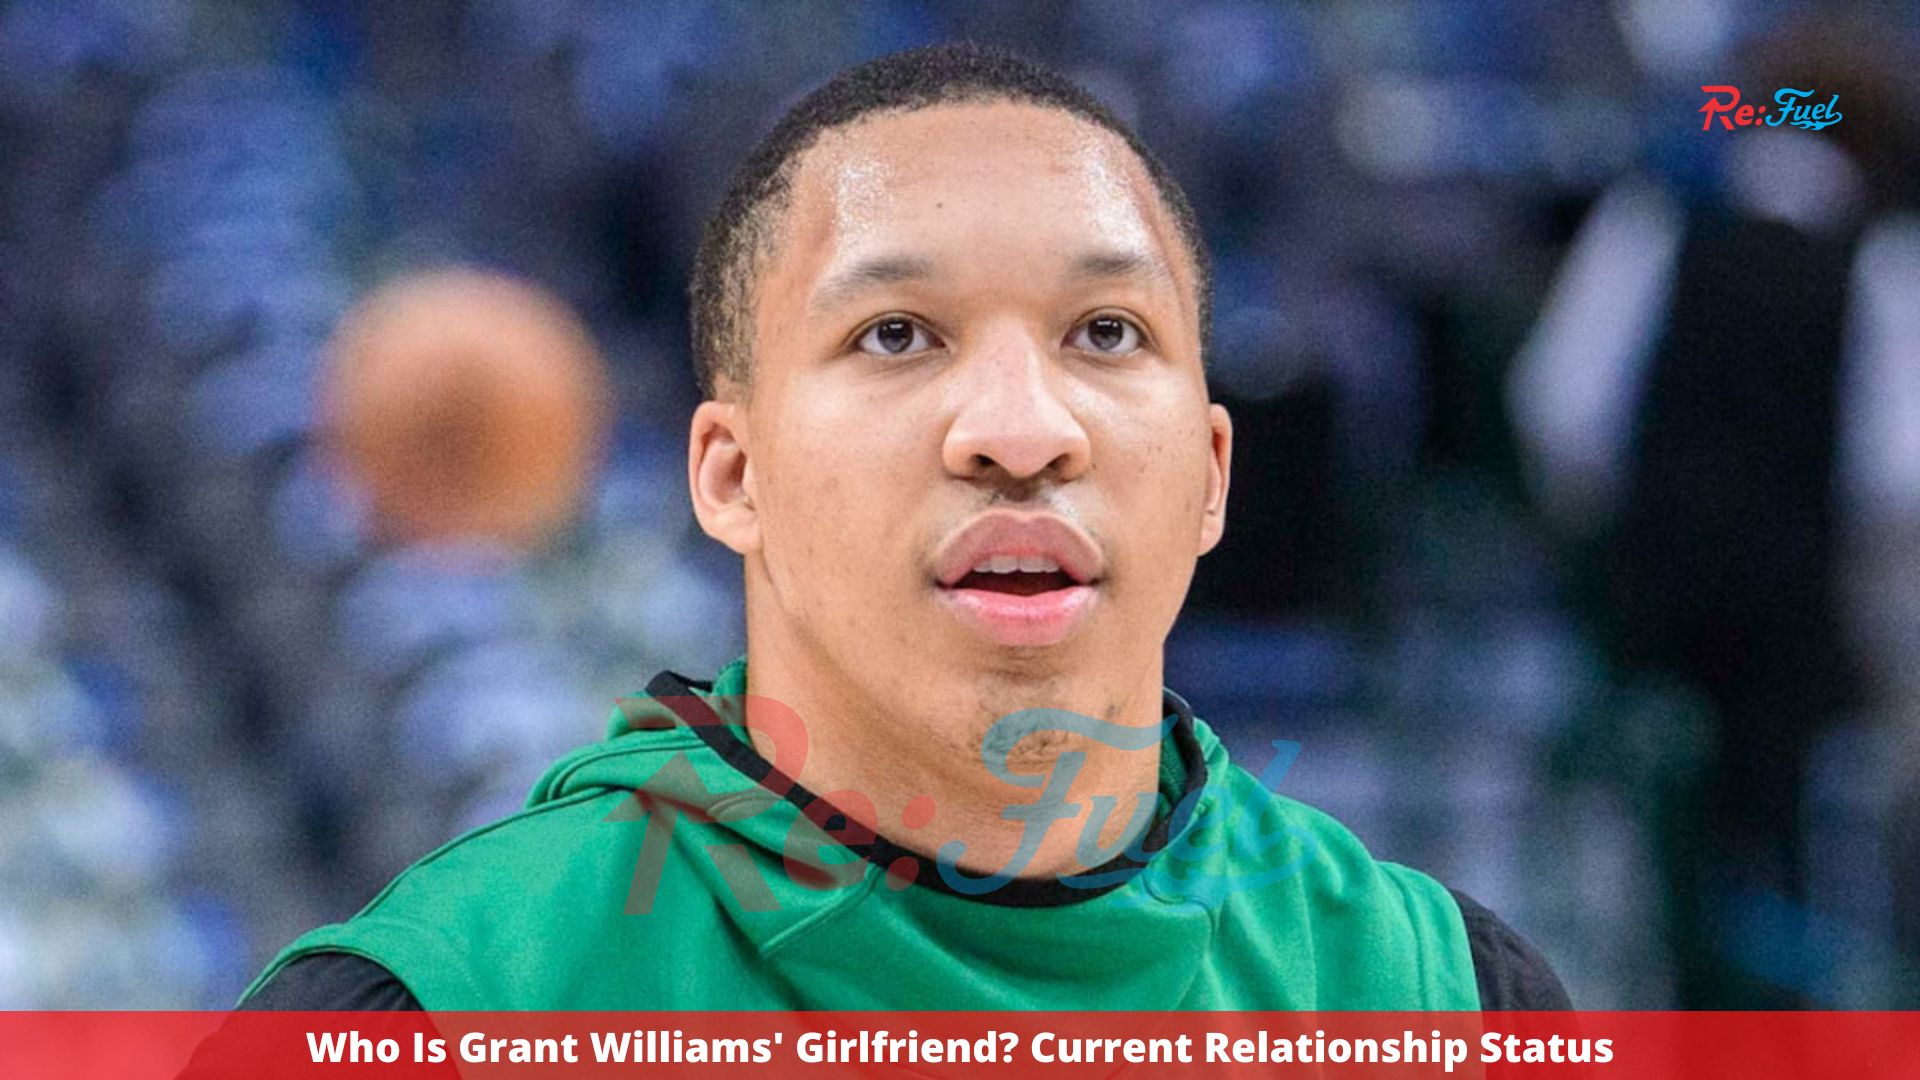 Who Is Grant Williams' Girlfriend? Current Relationship Status